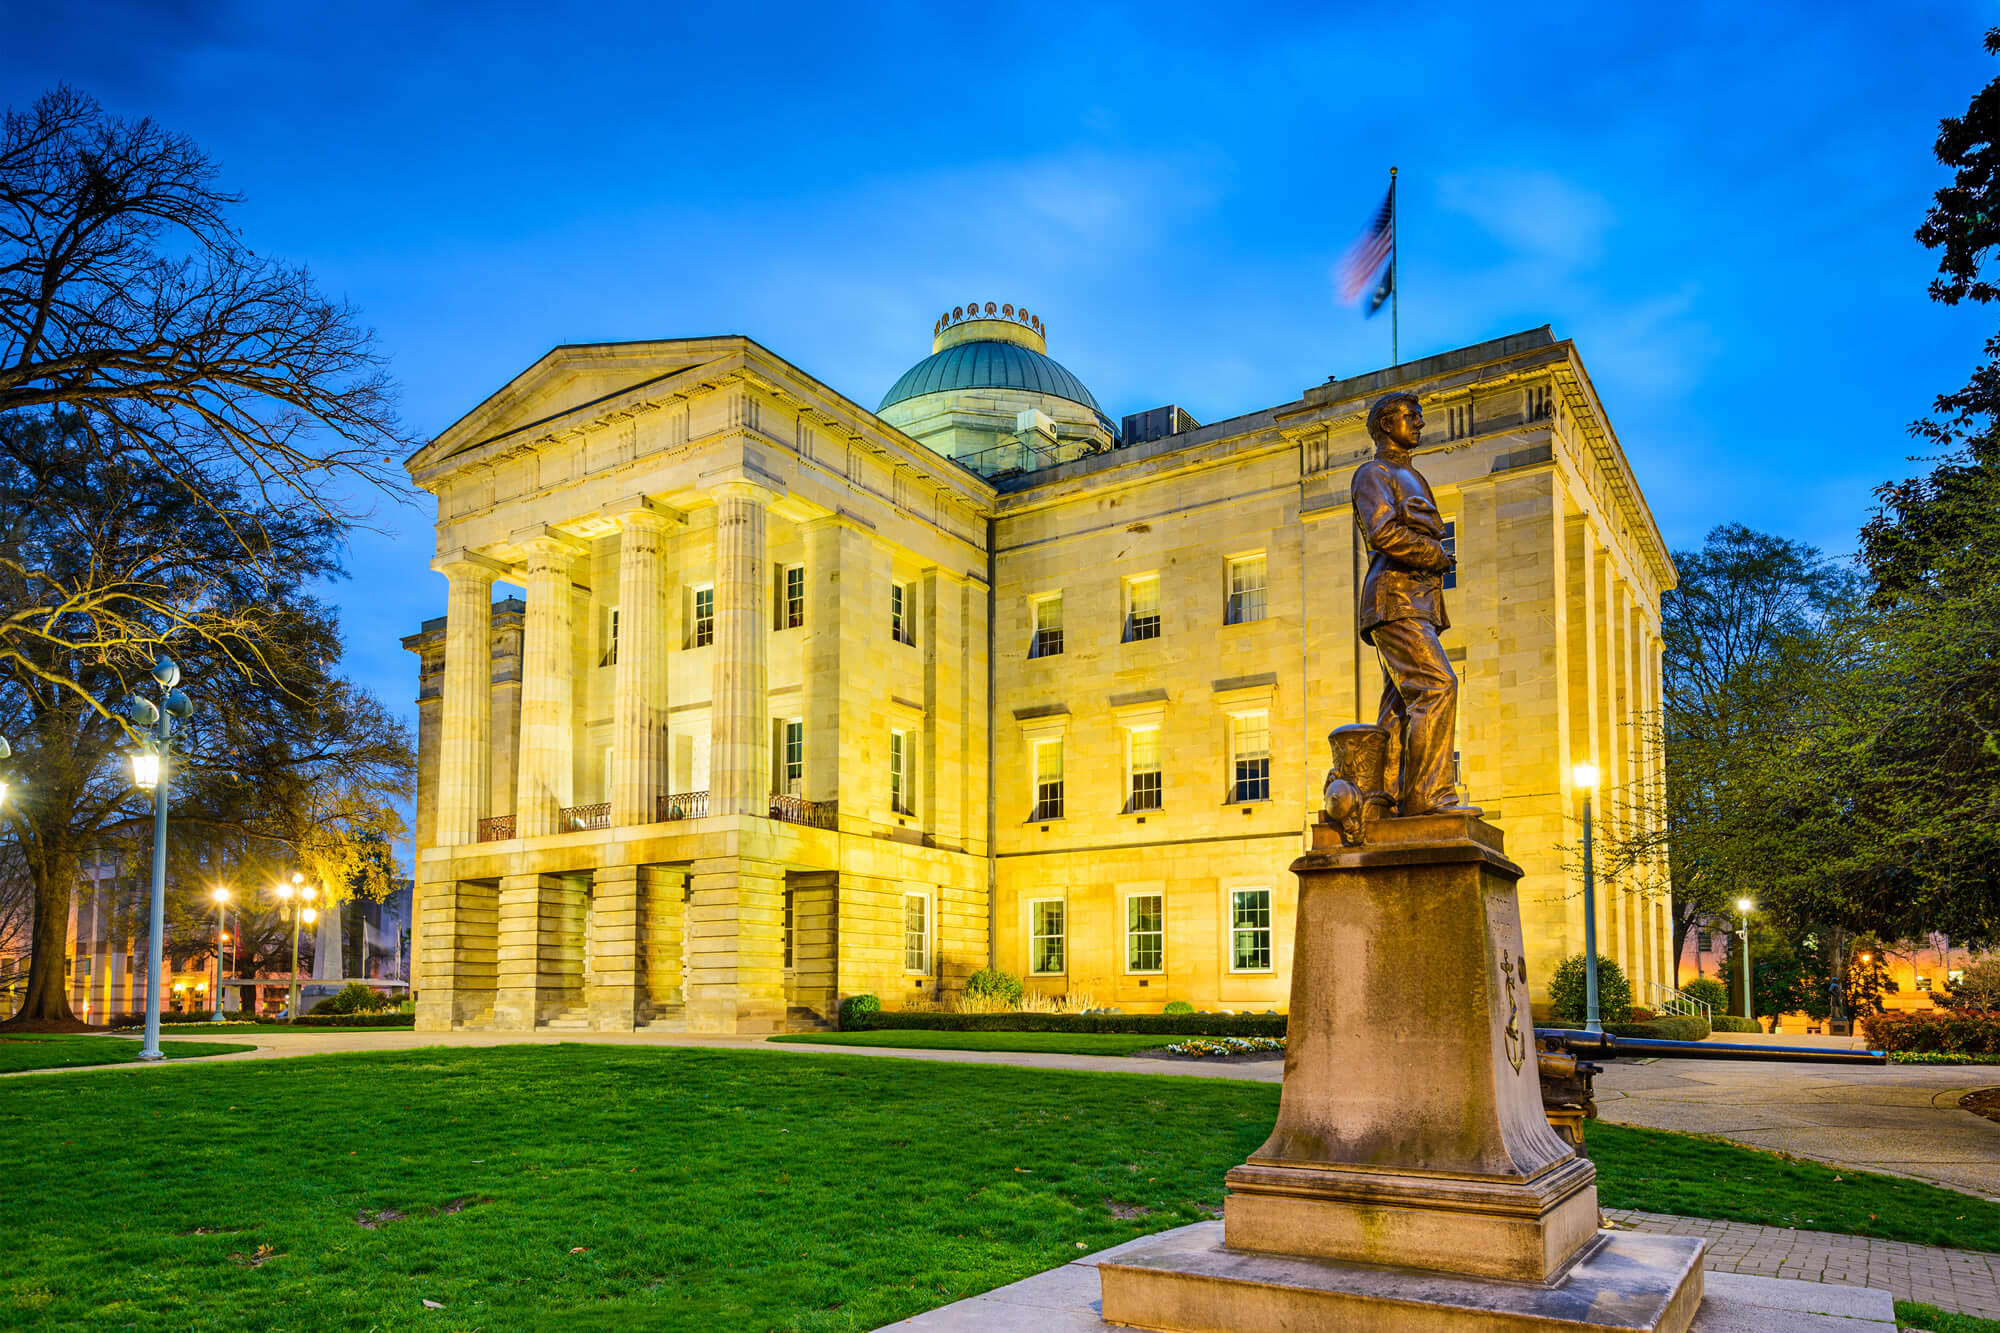 State Capitol Building, Raleigh